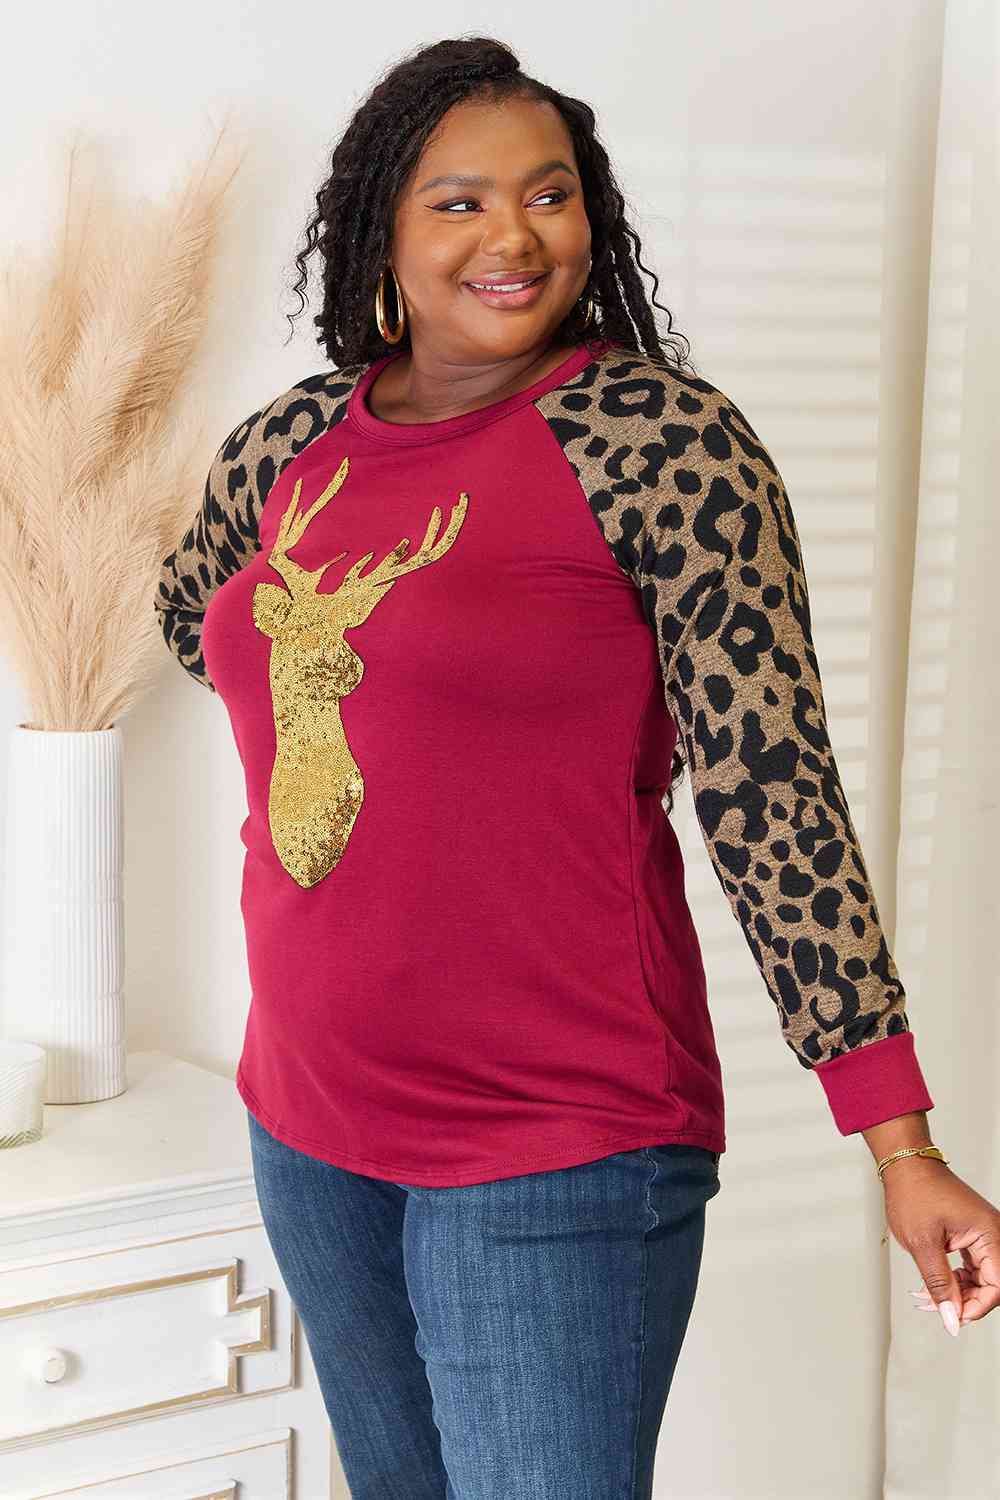 Heimish Full Size Animal Print Reindeer Top Print on any thing USA/STOD clothes